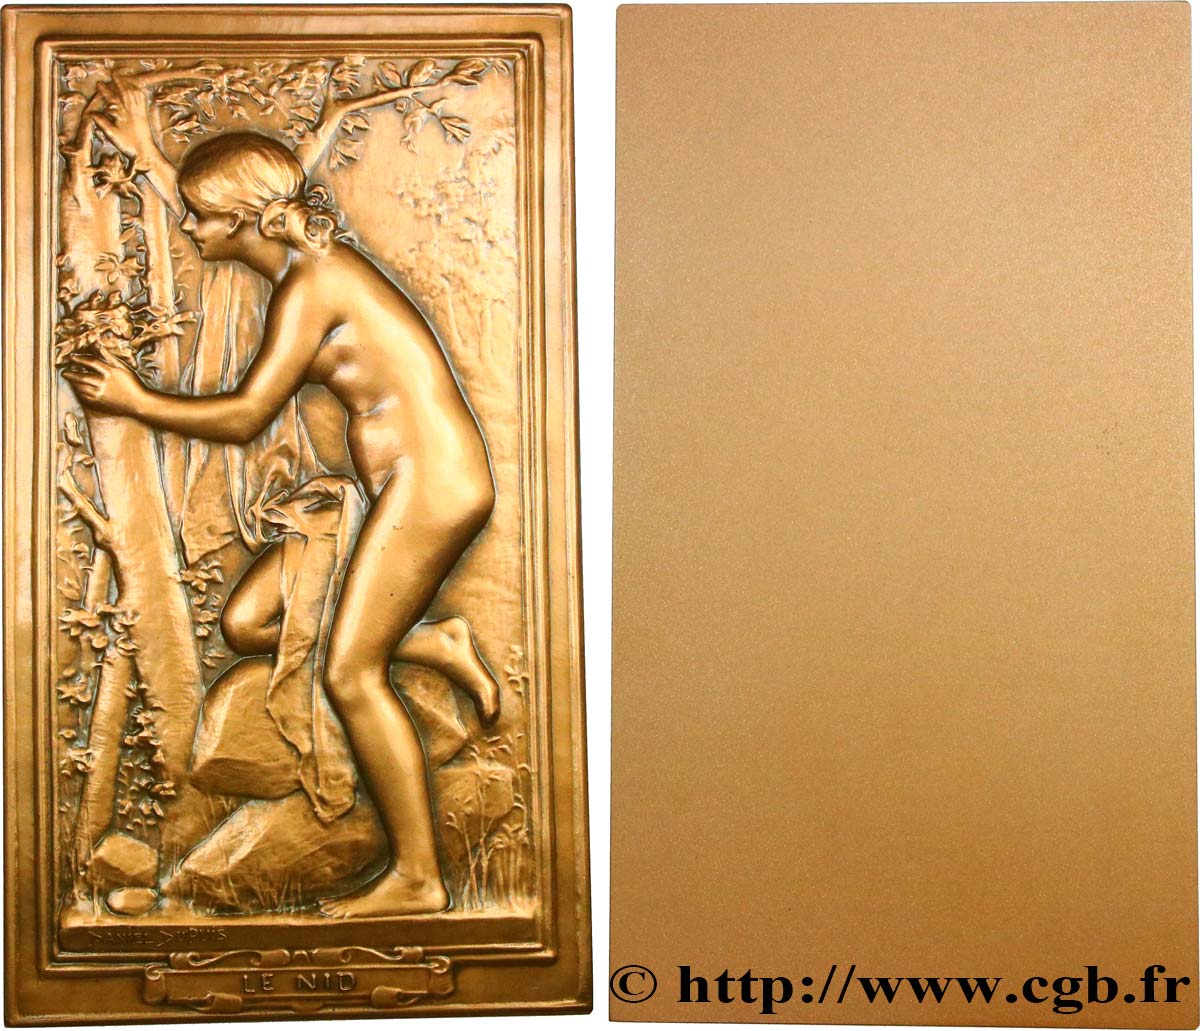 ART, PAINTING AND SCULPTURE Plaque, Le nid, refrappe EBC